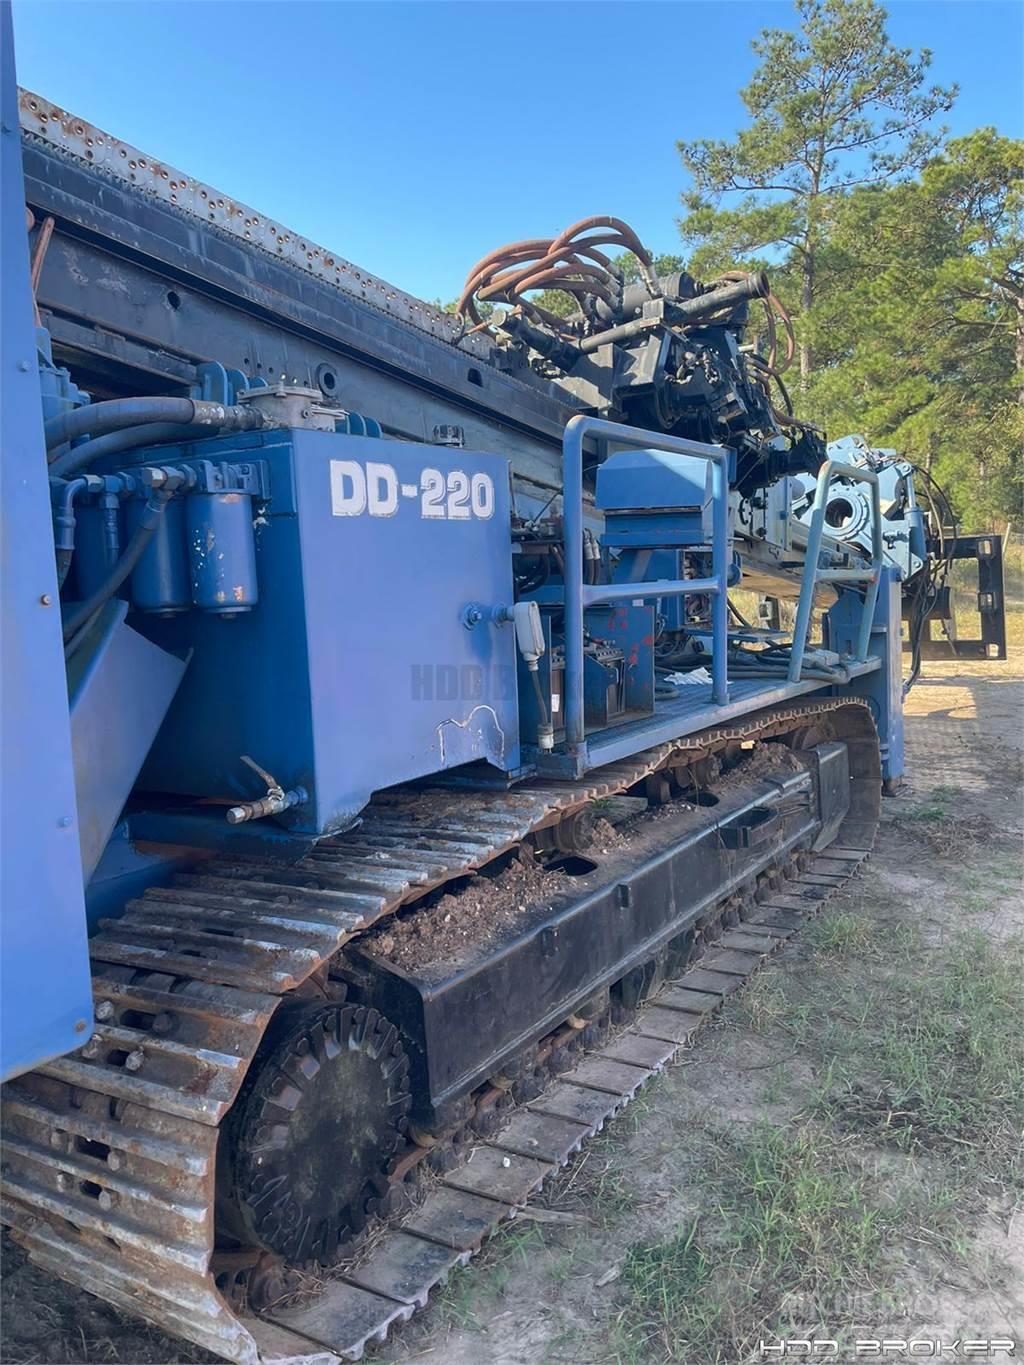 American Augers DD-220 Horizontal drilling rigs